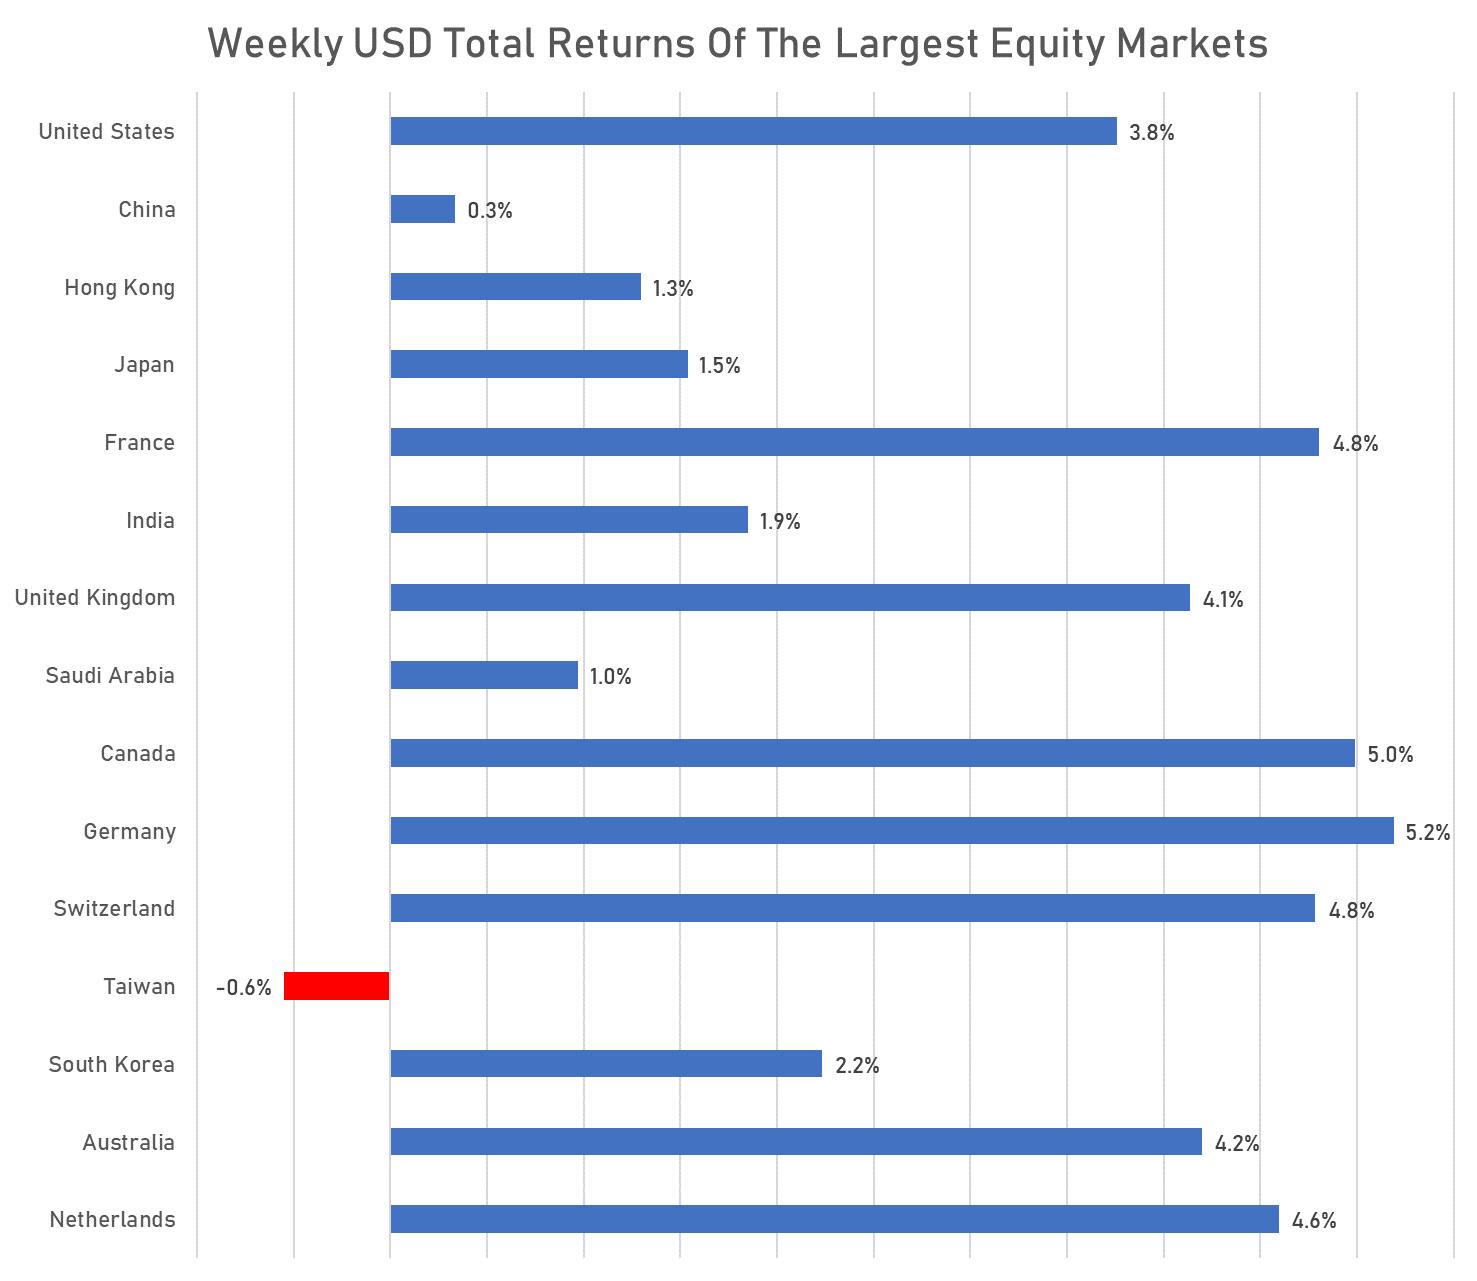 Weekly USD Total Returns of major equity markets | Sources: phipost.com, FactSet data